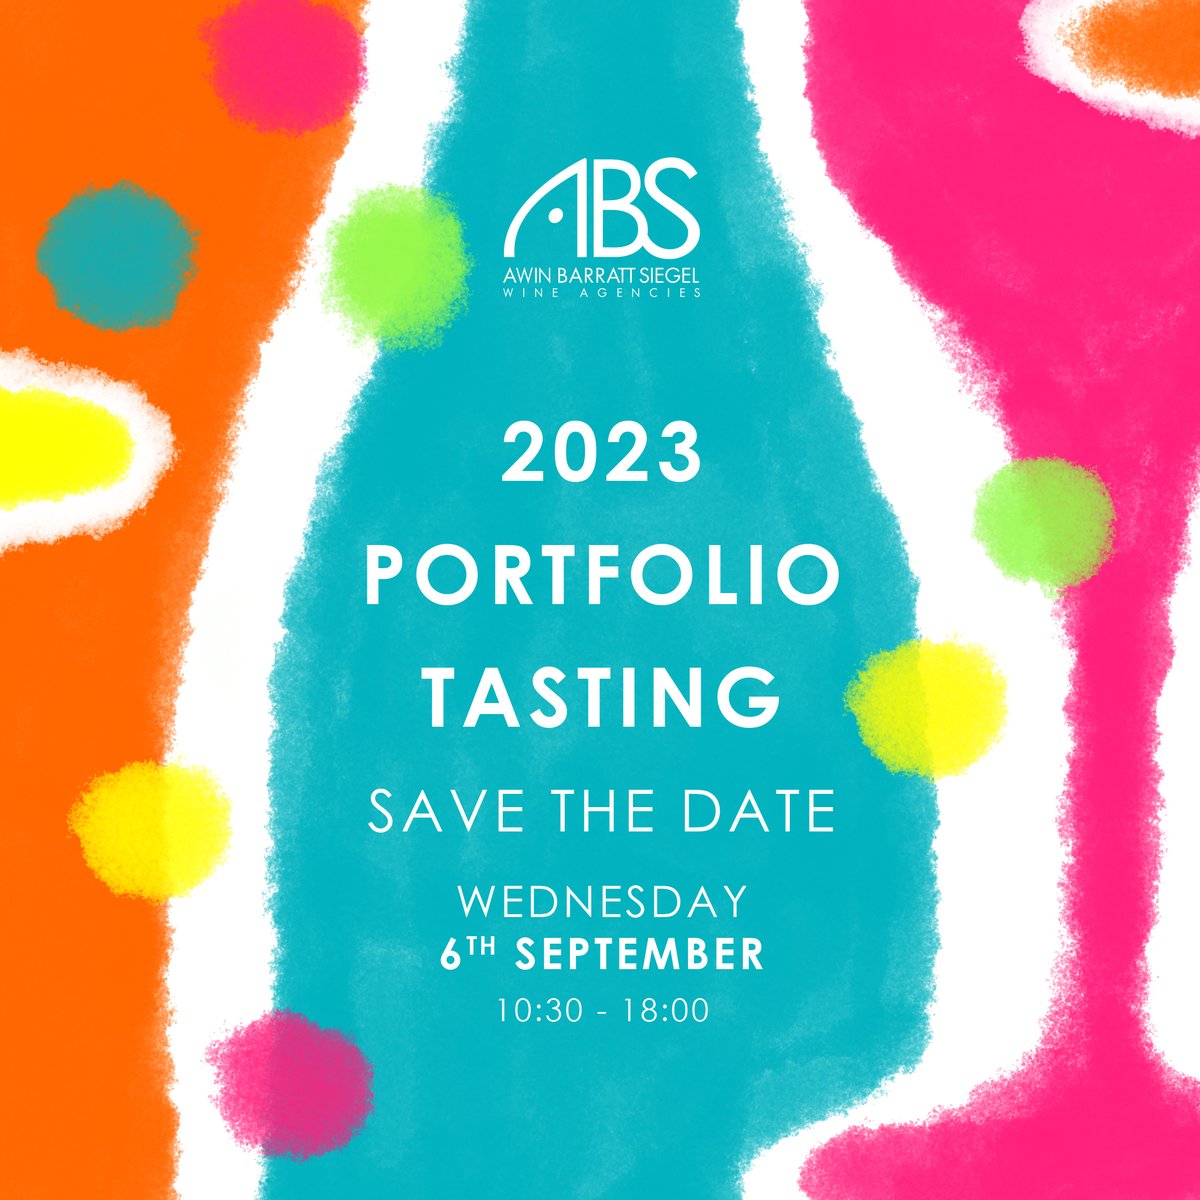 For more information contact lesley@abs.wine or go to abs.wine 6th September 2023 from 10:30am to 6:00pm The Stables, 25 Shelton St, Covent Garden, London, WC2H 9HW #ABSPortfolioTasting #TradeTasting #PortfolioTasting #ABSWines #ABSWine